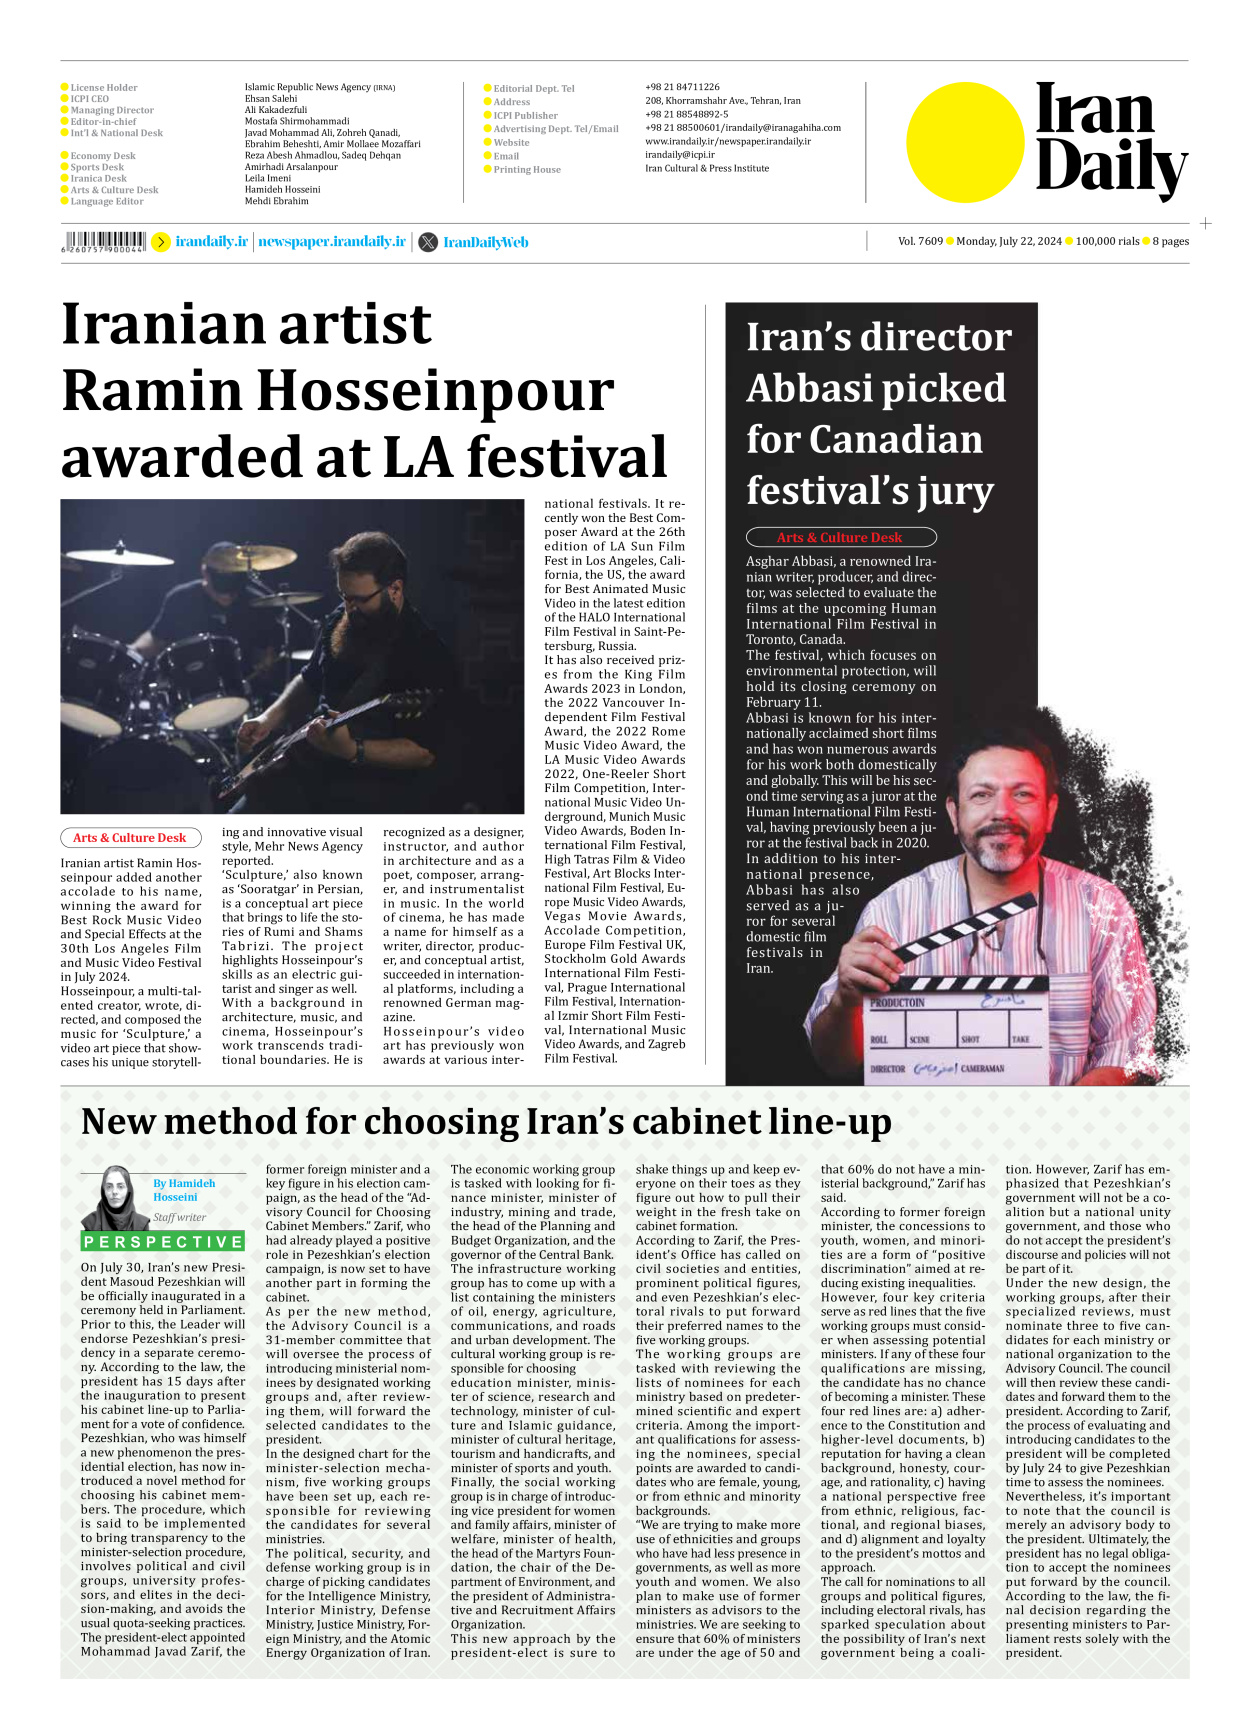 Iran Daily - Number Seven Thousand Six Hundred and Nine - 22 July 2024 - Page 8